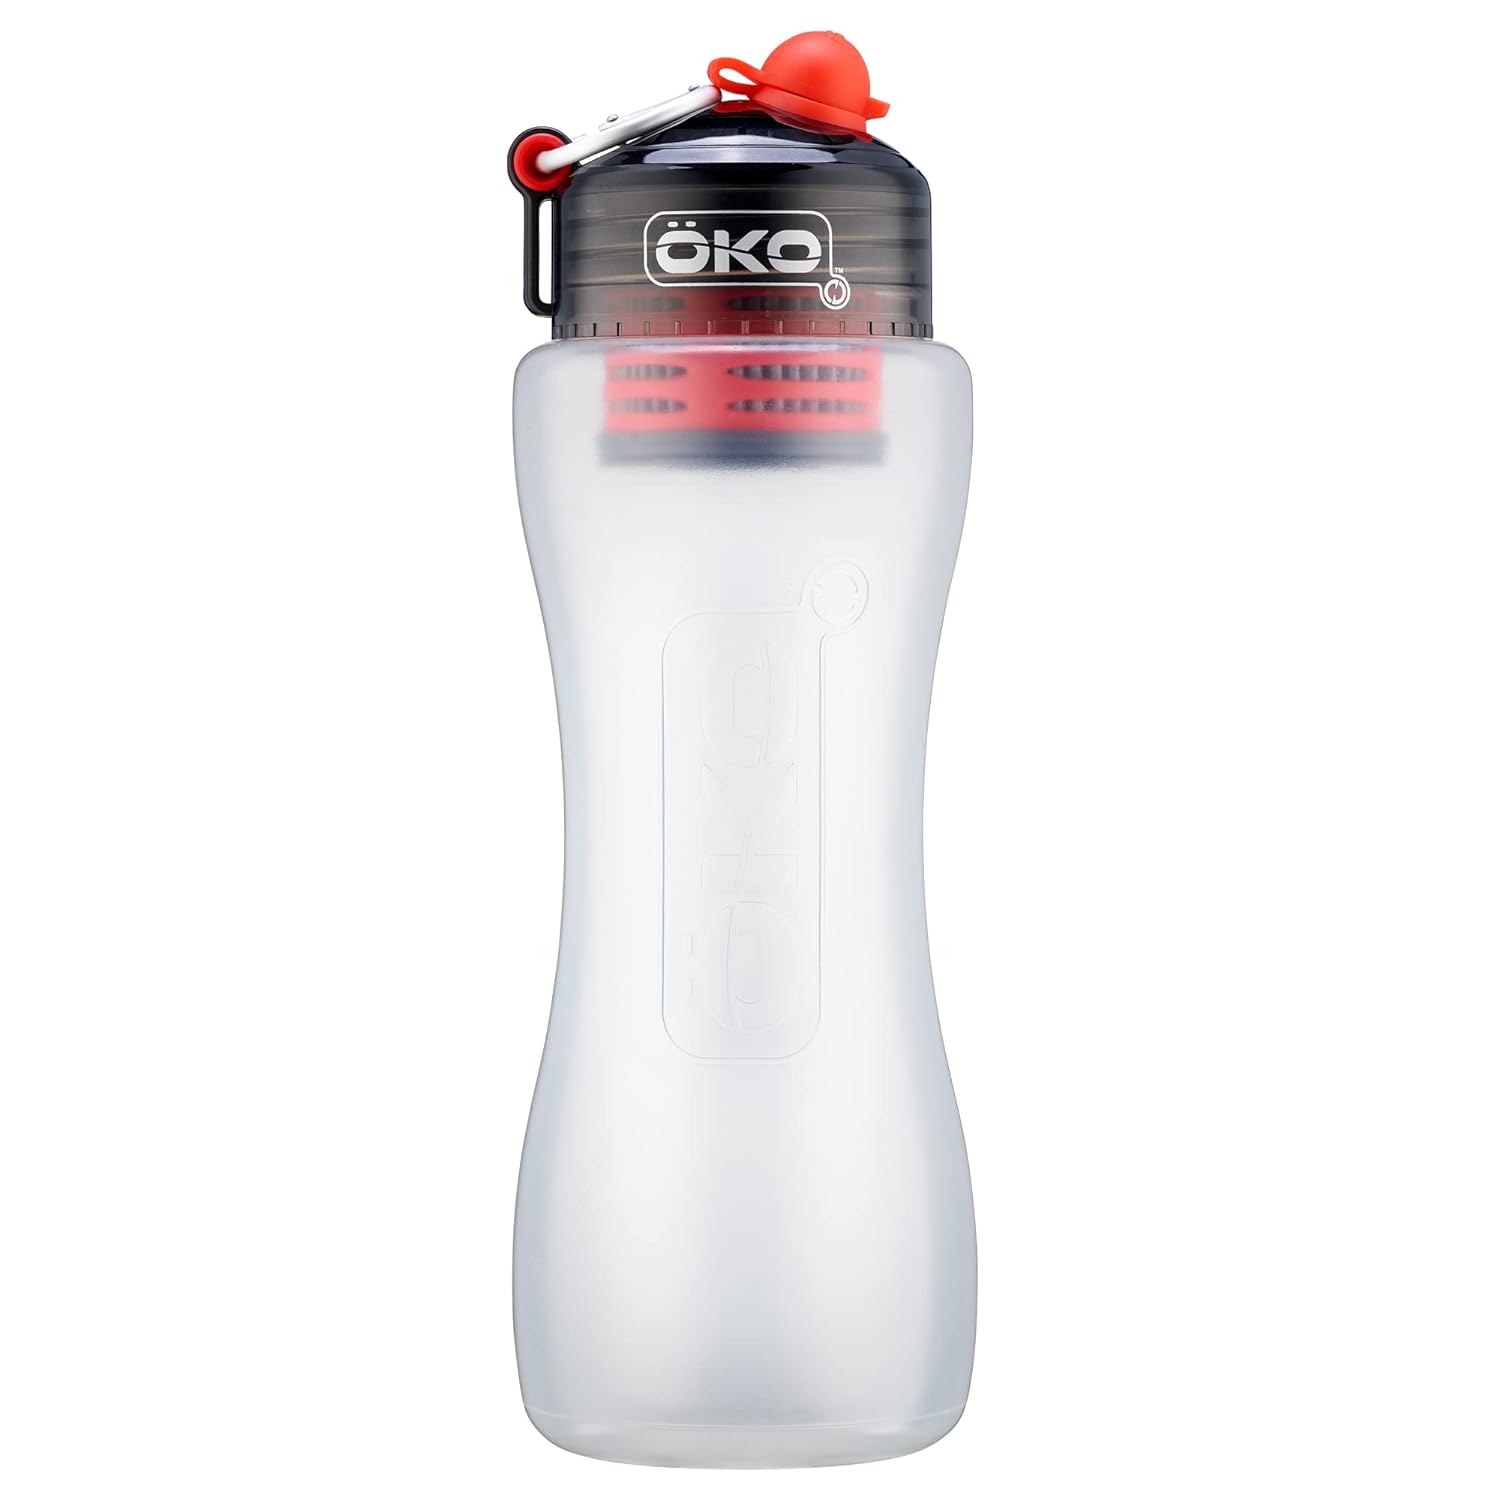 ÖKO – Advanced Water Bottle with Filter Derived from NASA Technology, Filtered Water Bottle for Travel/Outdoors & Home, Water Filter Bottle for Harmful Contaminants (1L, Charcoal)